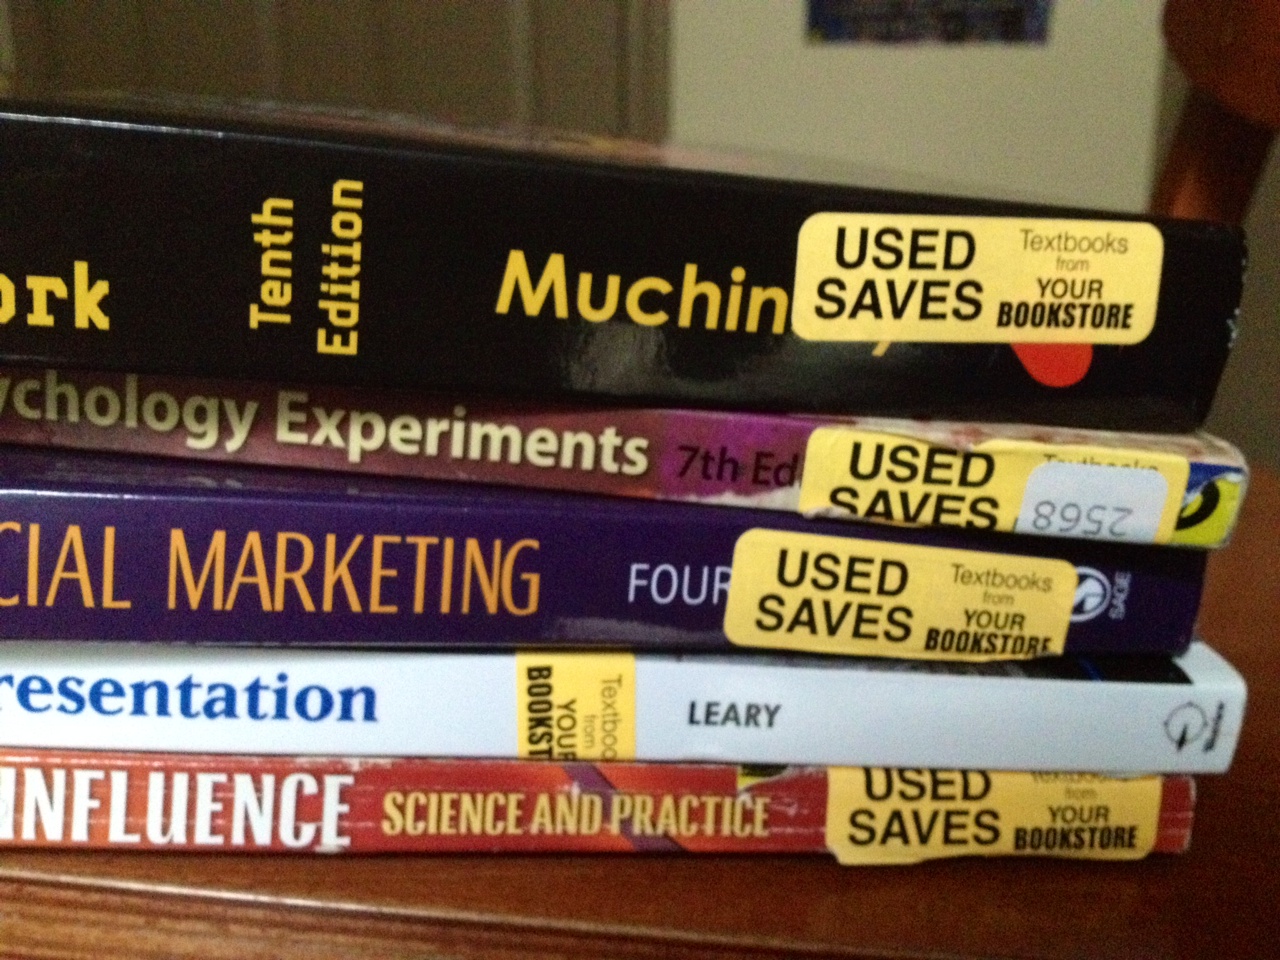 Buy Used College Textbooks And Save Money On Cheap Books Startschoolnow